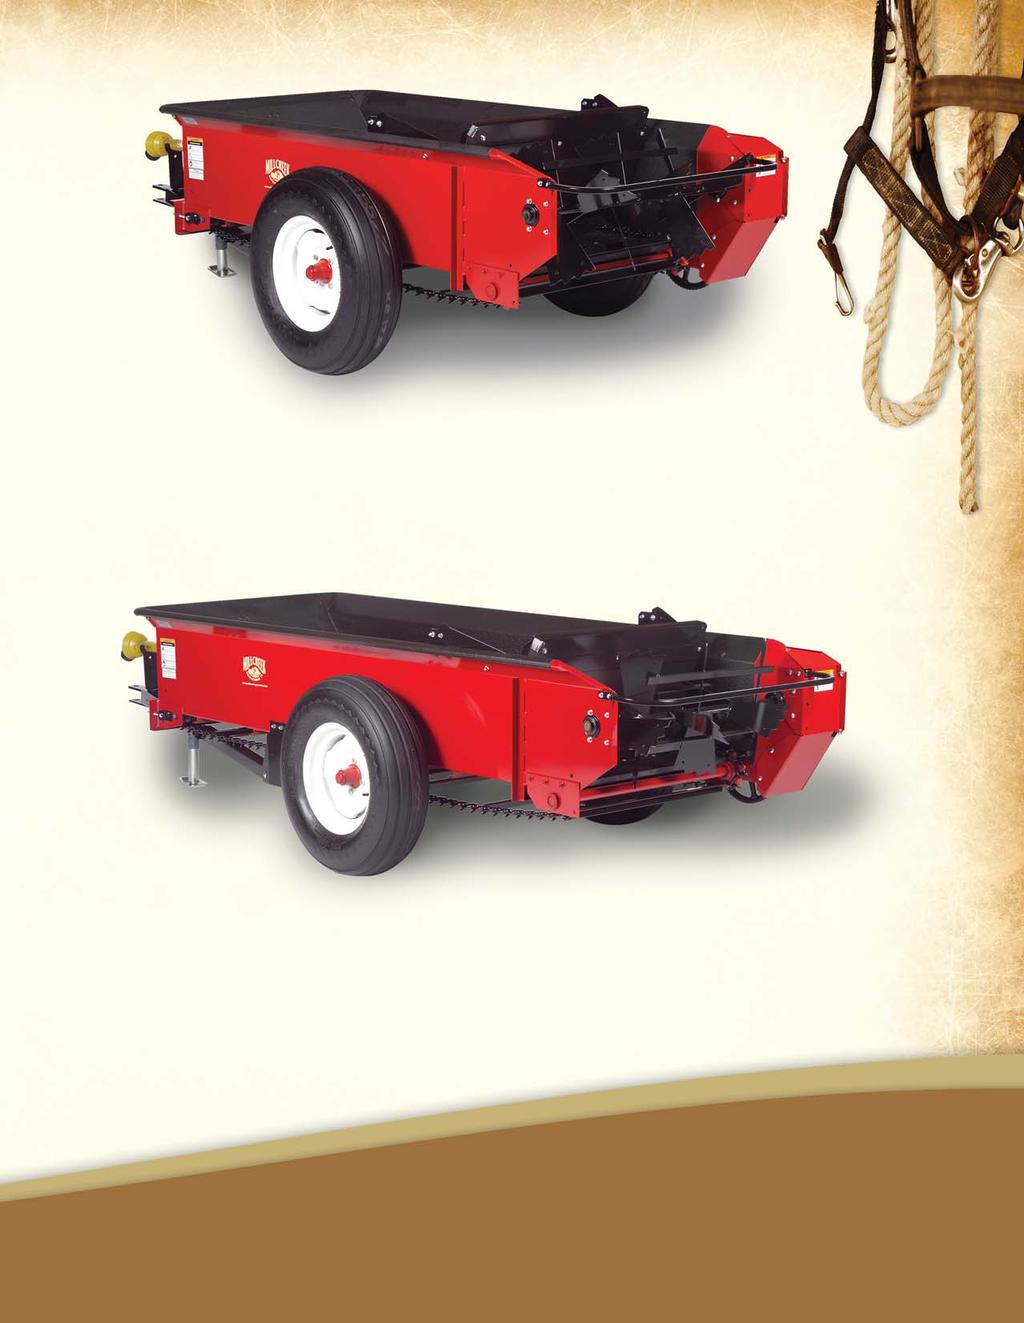 Model 57 (56 cubic feet, or 45 bushel capacity) For up to 10 horses Now you re stepping up to a small farm-sized manure spreader.